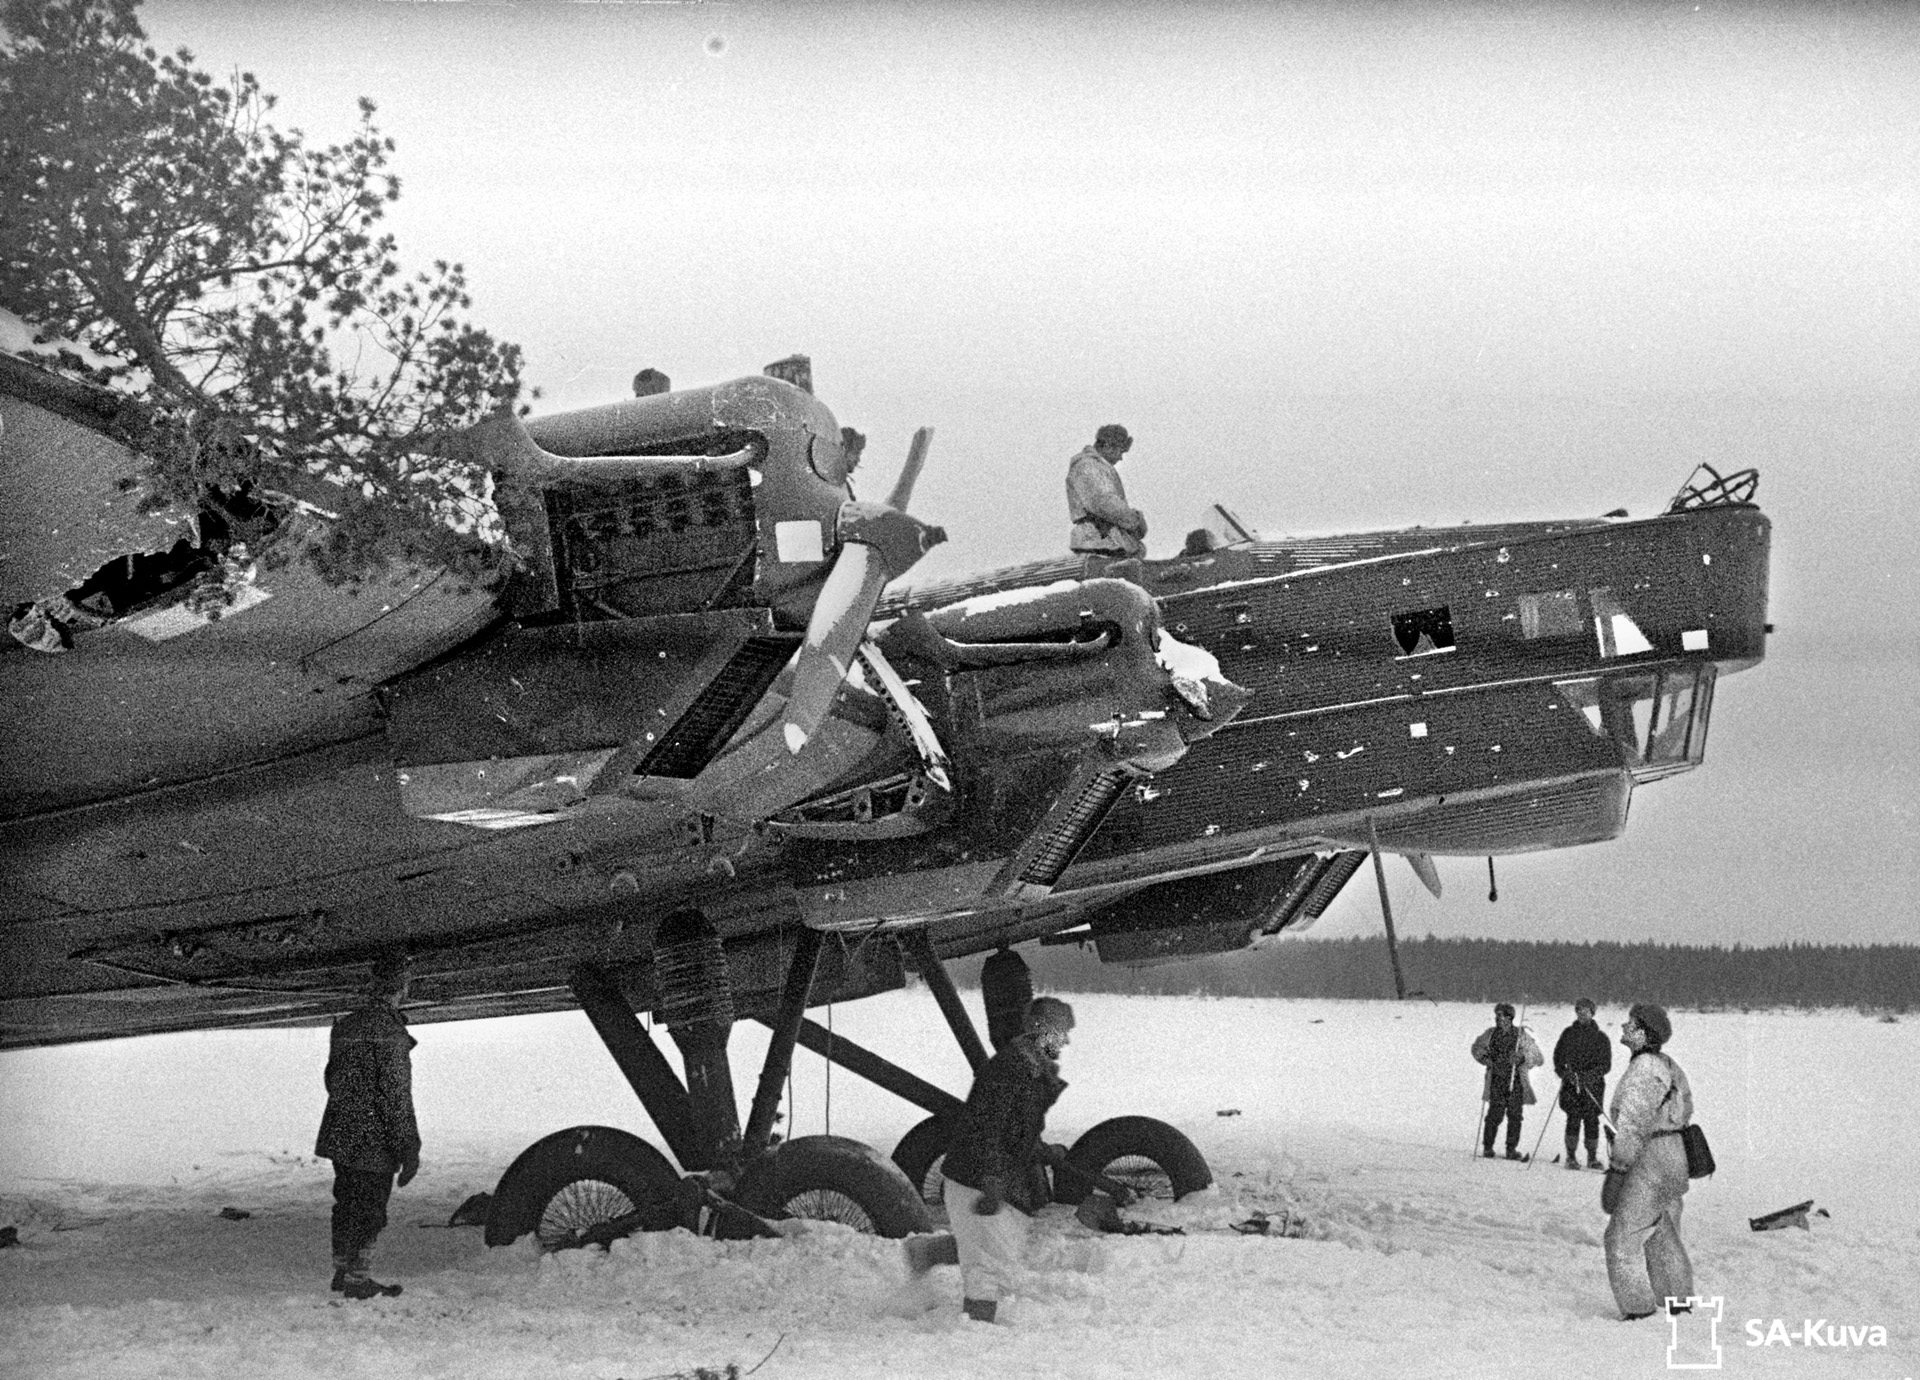 An ungainly, obsolescent Tupolev TB-3 four-engine heavy bomber comes to an ignominious end after crash-landing on a frozen lake and being destroyed by a grenade launcher.